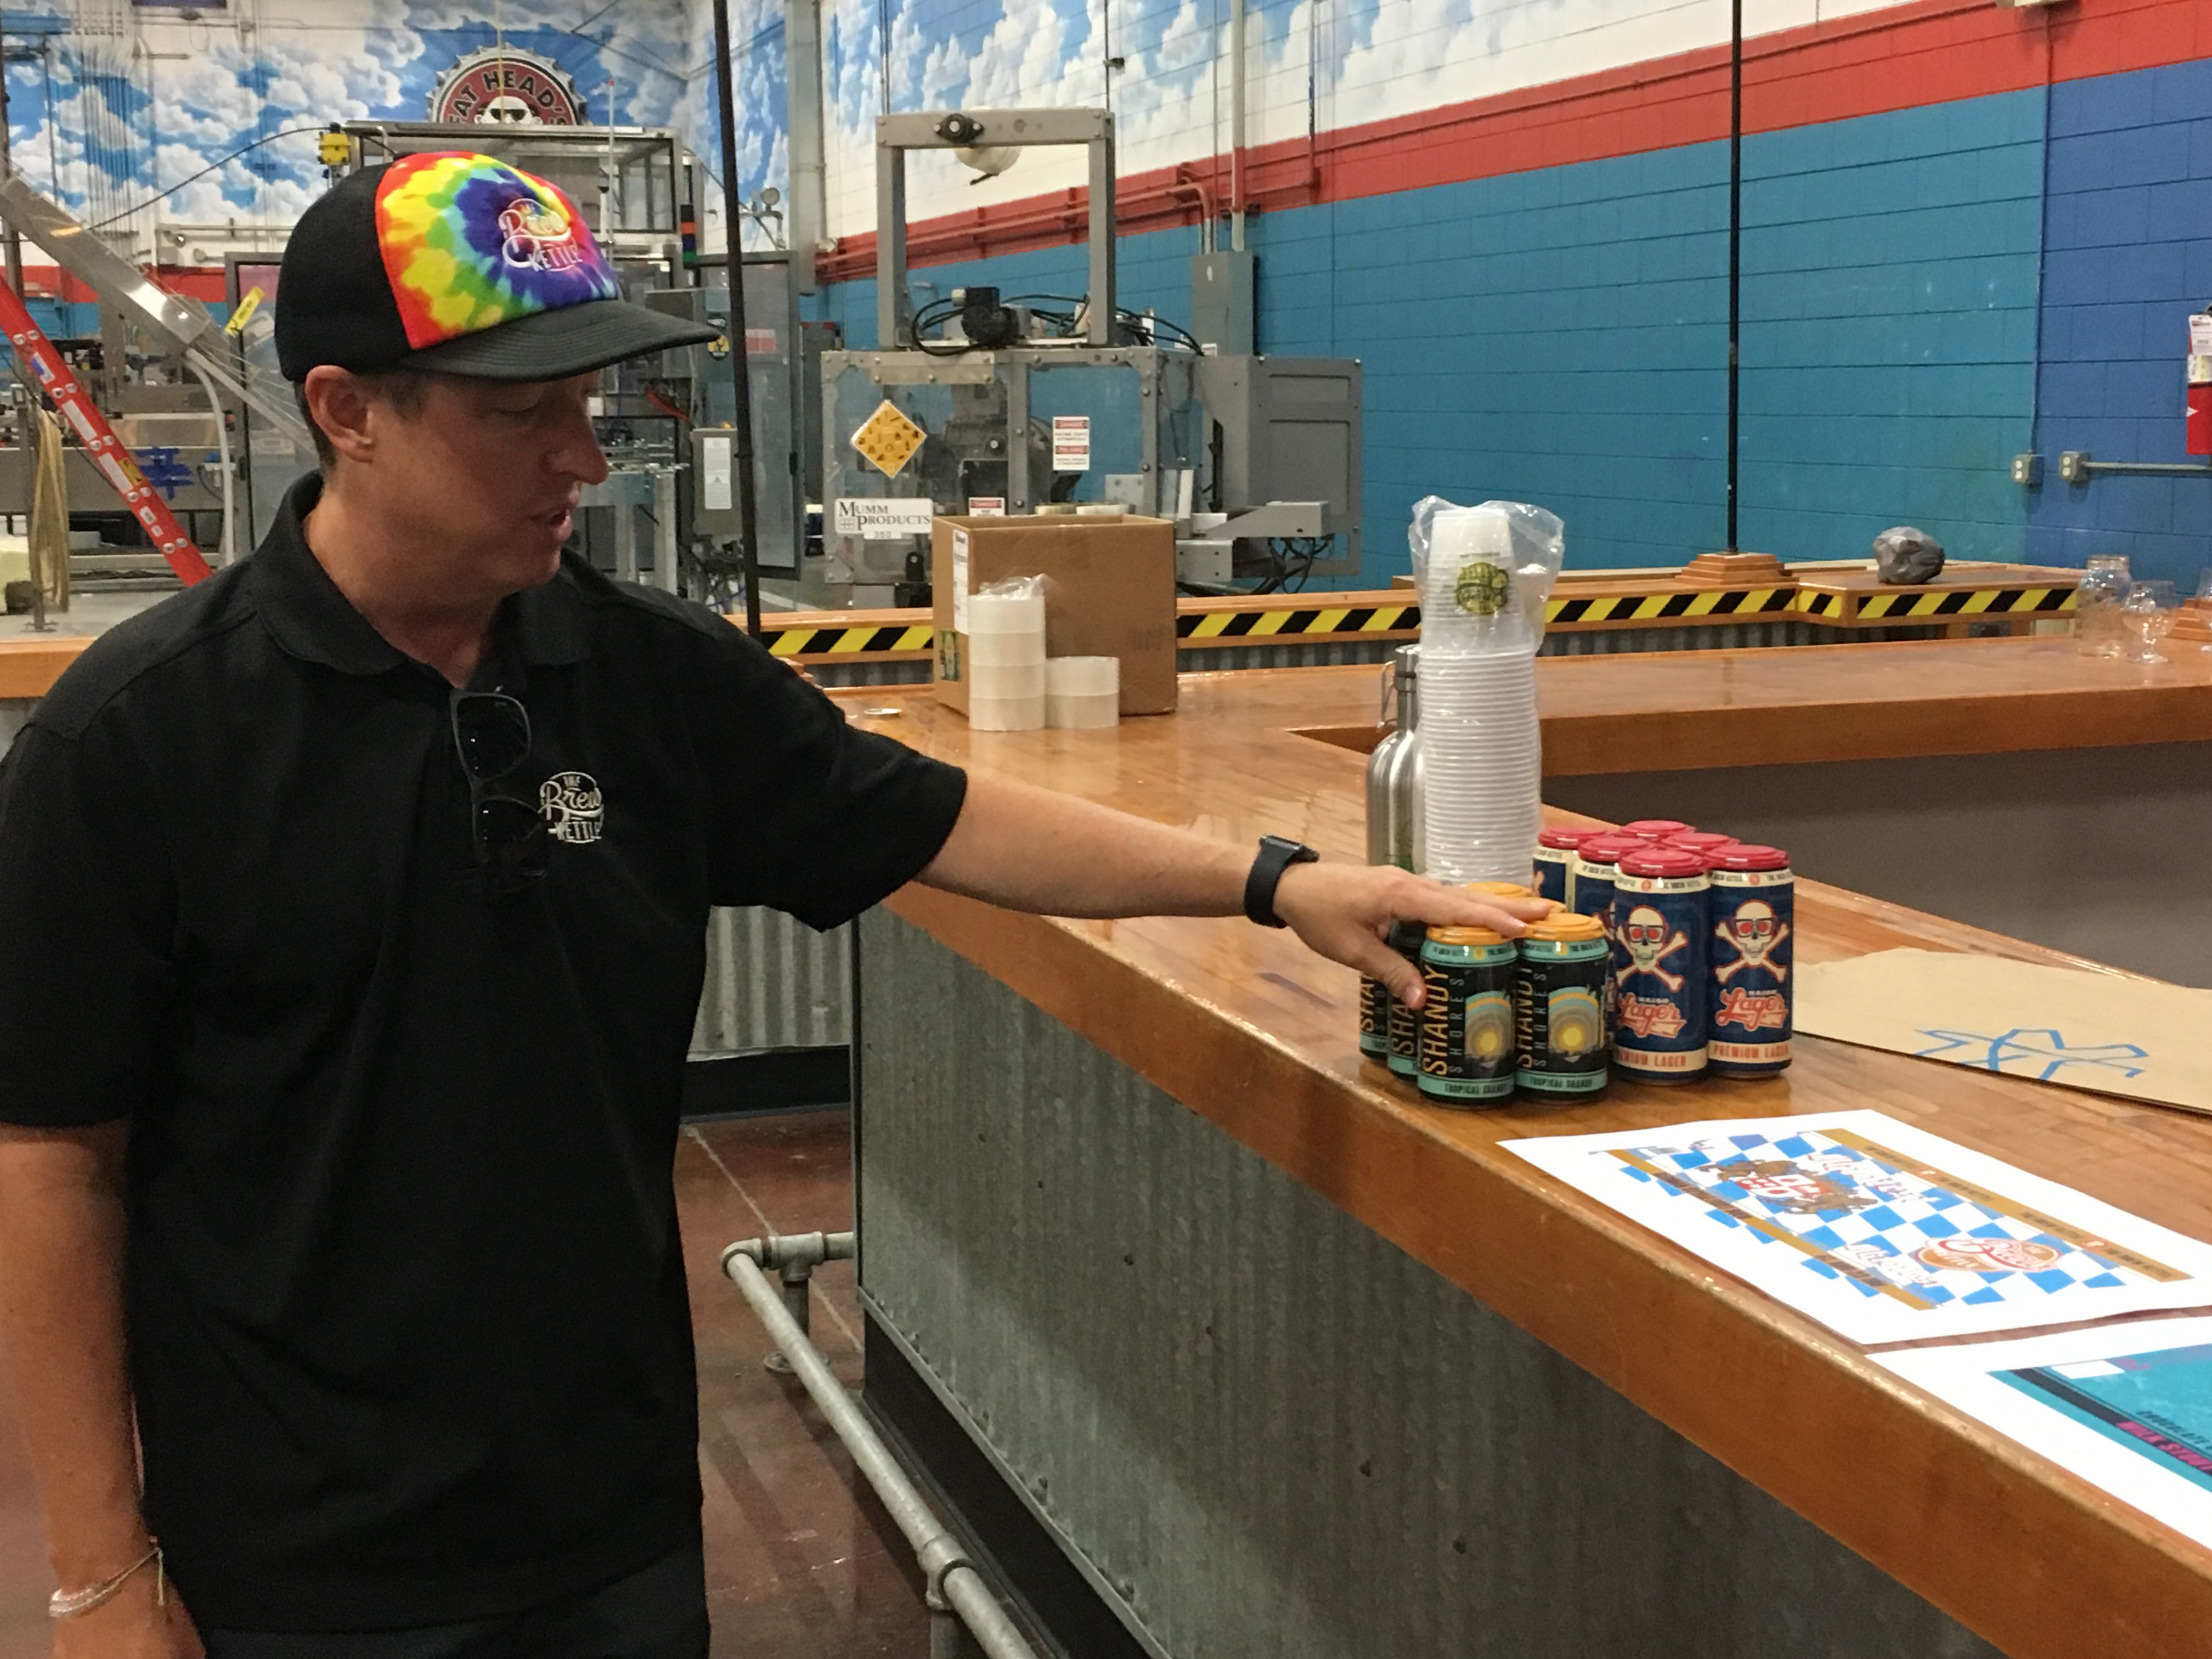 With demand growing, Brew Kettle expands Strongsville brewery